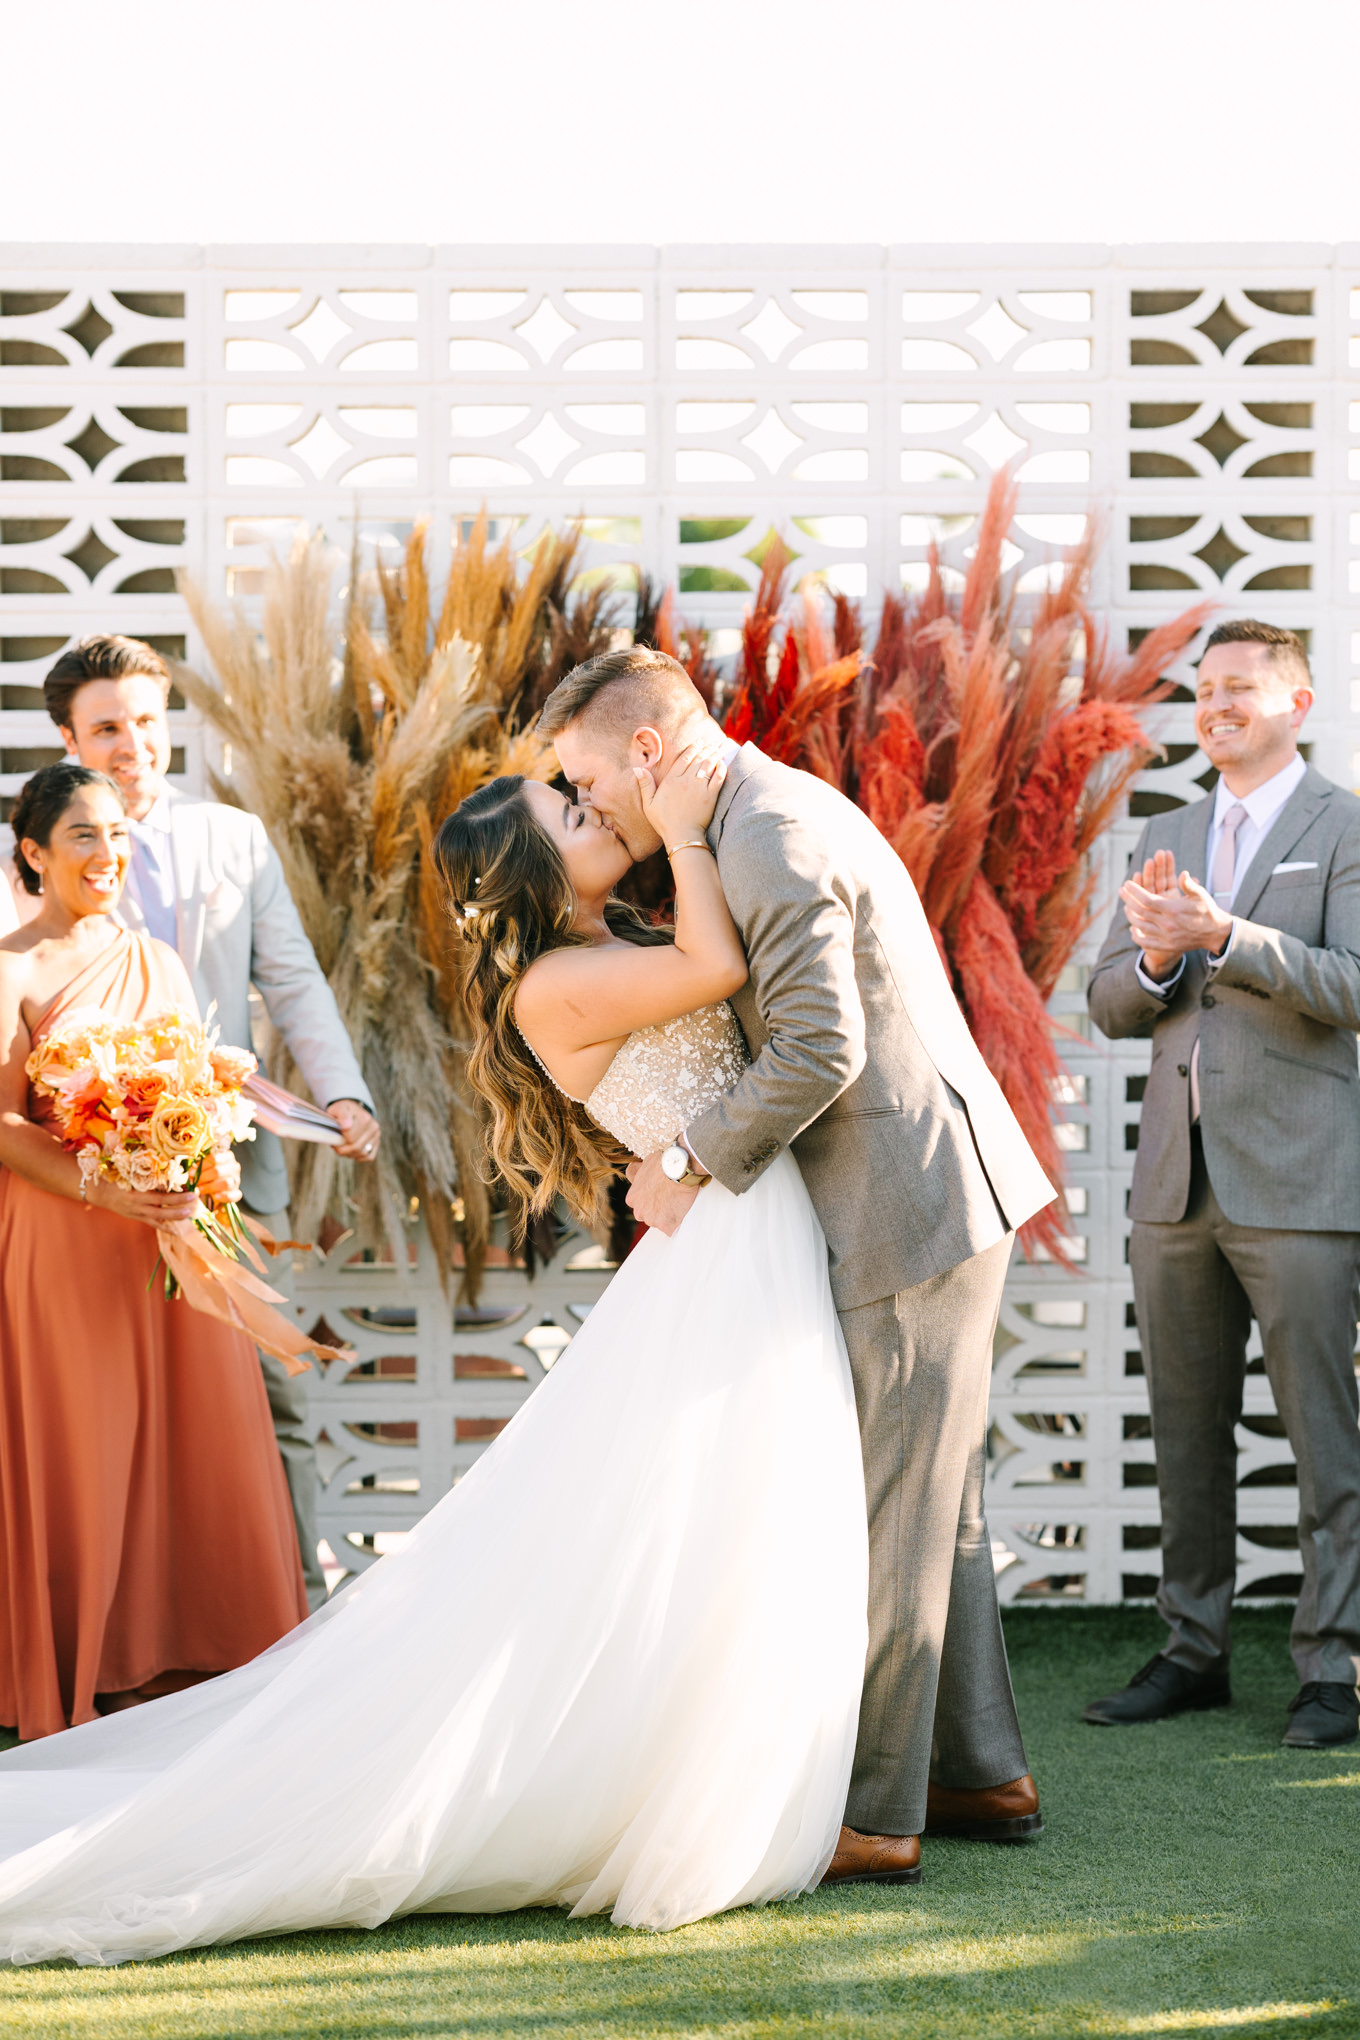 Bride and groom kissing at wedding ceremony | Pink and orange Lautner Compound wedding | Colorful Palm Springs wedding photography | #palmspringsphotographer #palmspringswedding #lautnercompound #southerncaliforniawedding  Source: Mary Costa Photography | Los Angeles